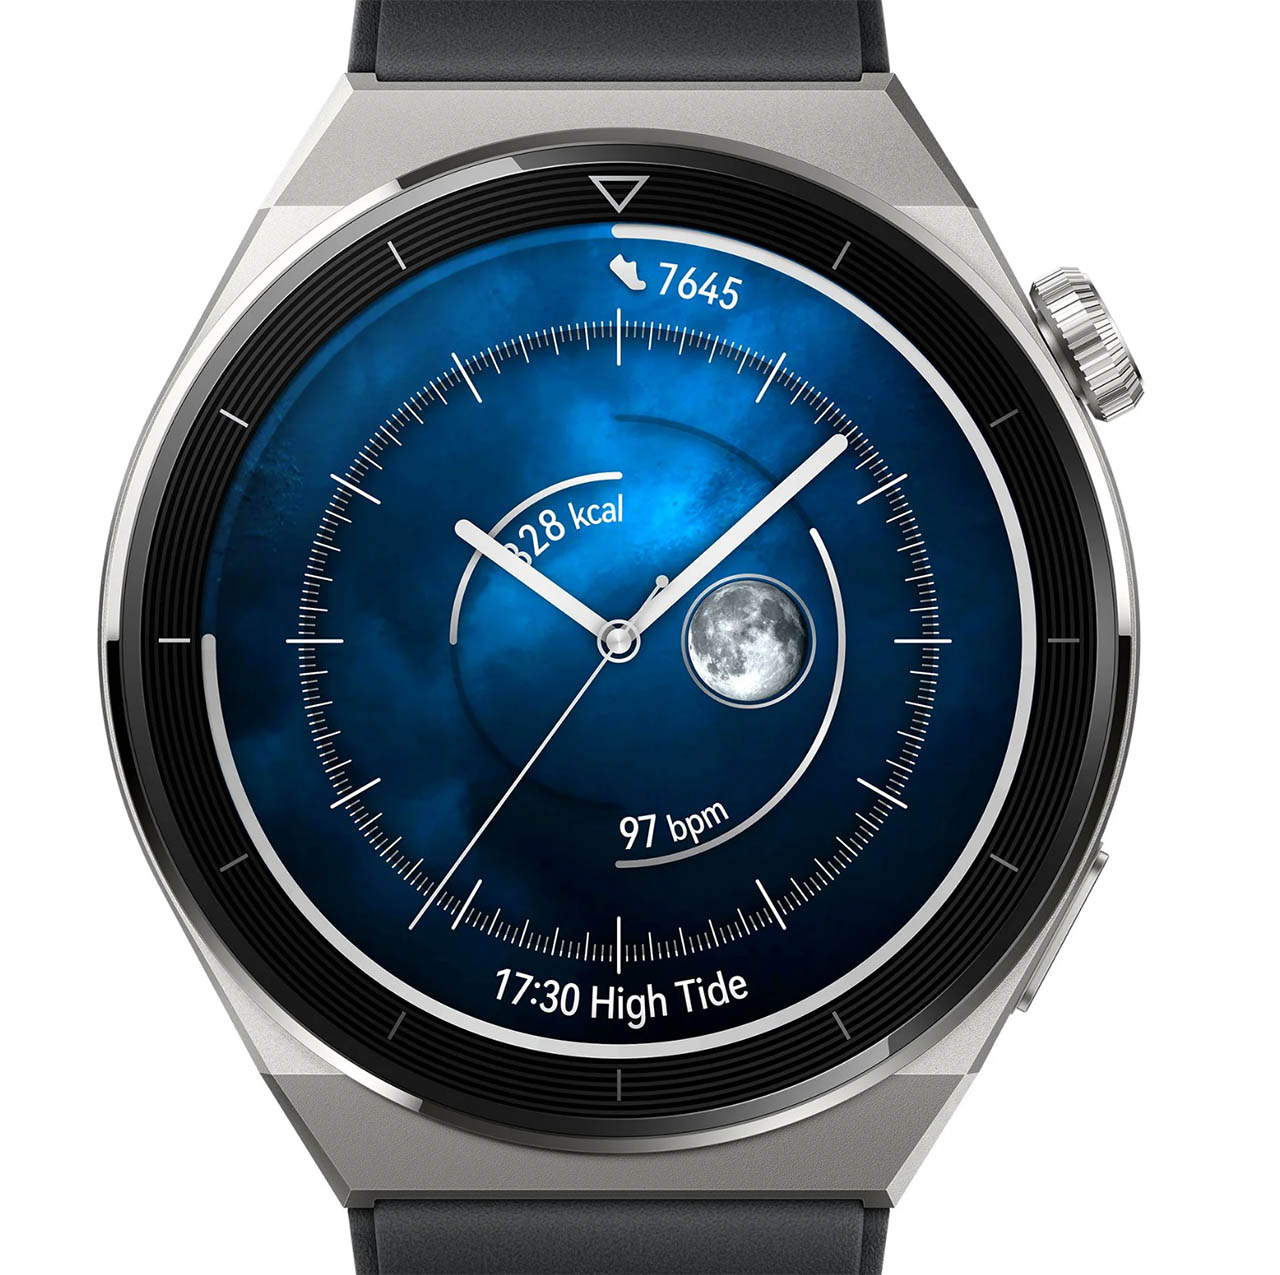 Huawei Watch GT 2 Pro NZ Prices - PriceMe